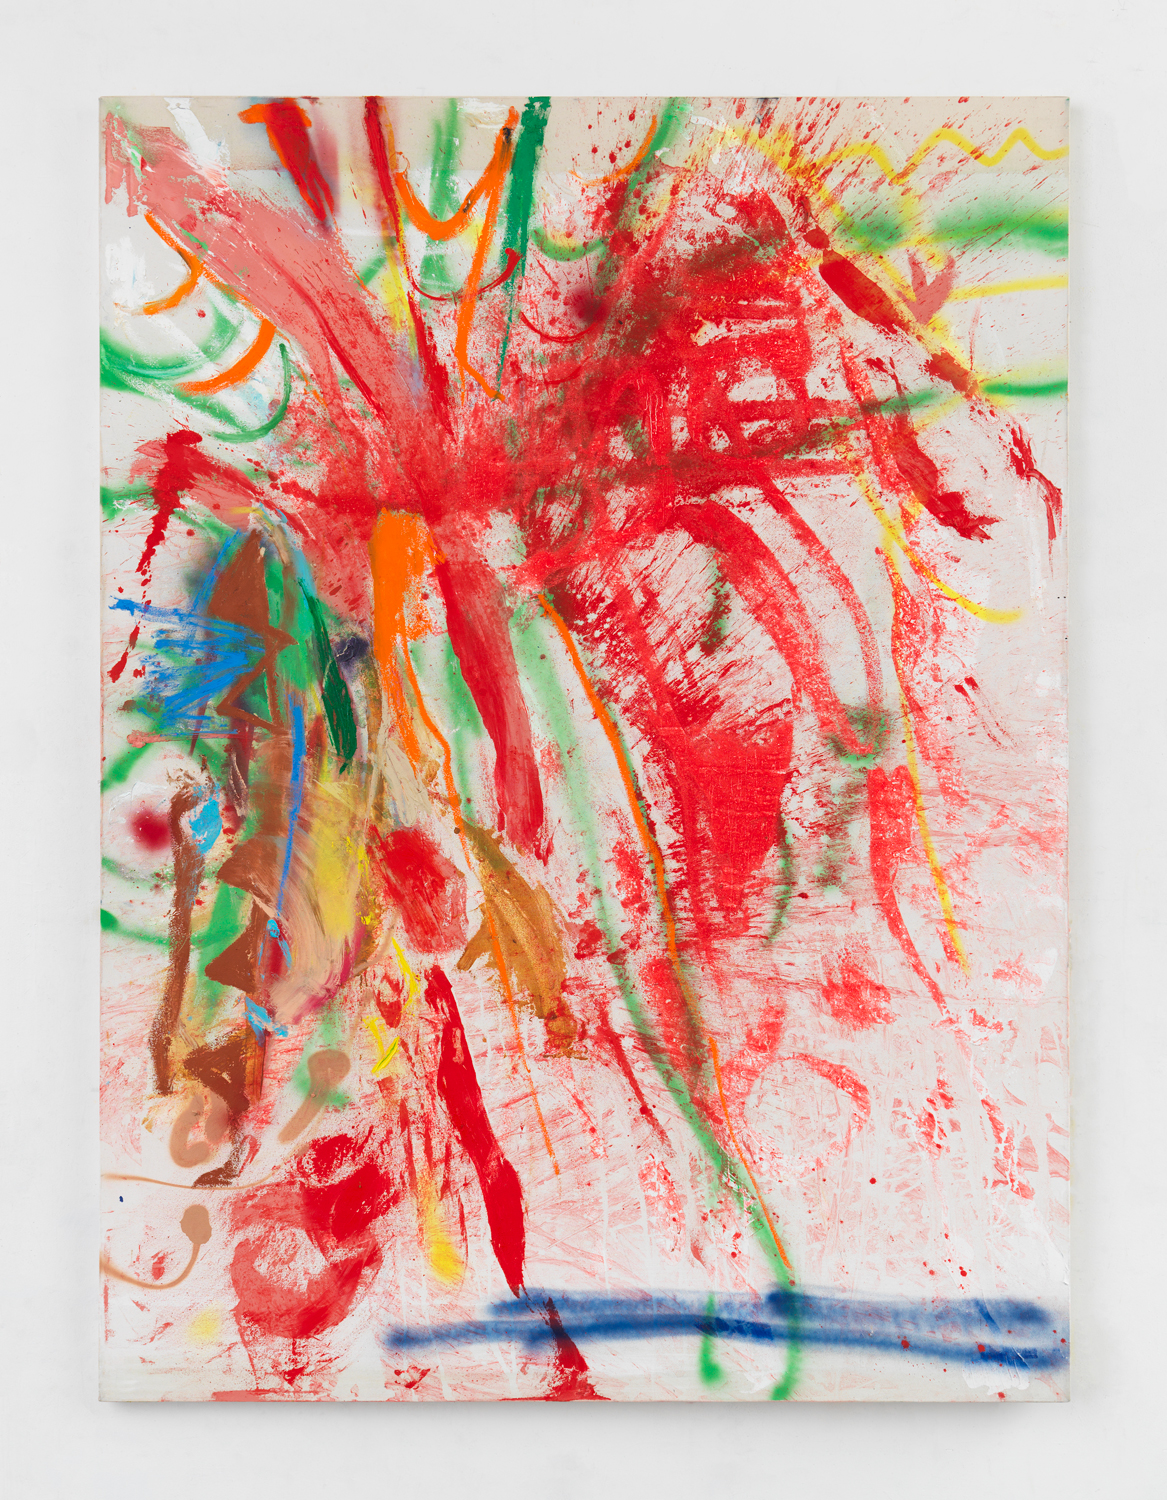 Bill Saylor, Untitled, 2021, Oil, oil stick, spray paint, gesso on canvas, 84 x 61 in.